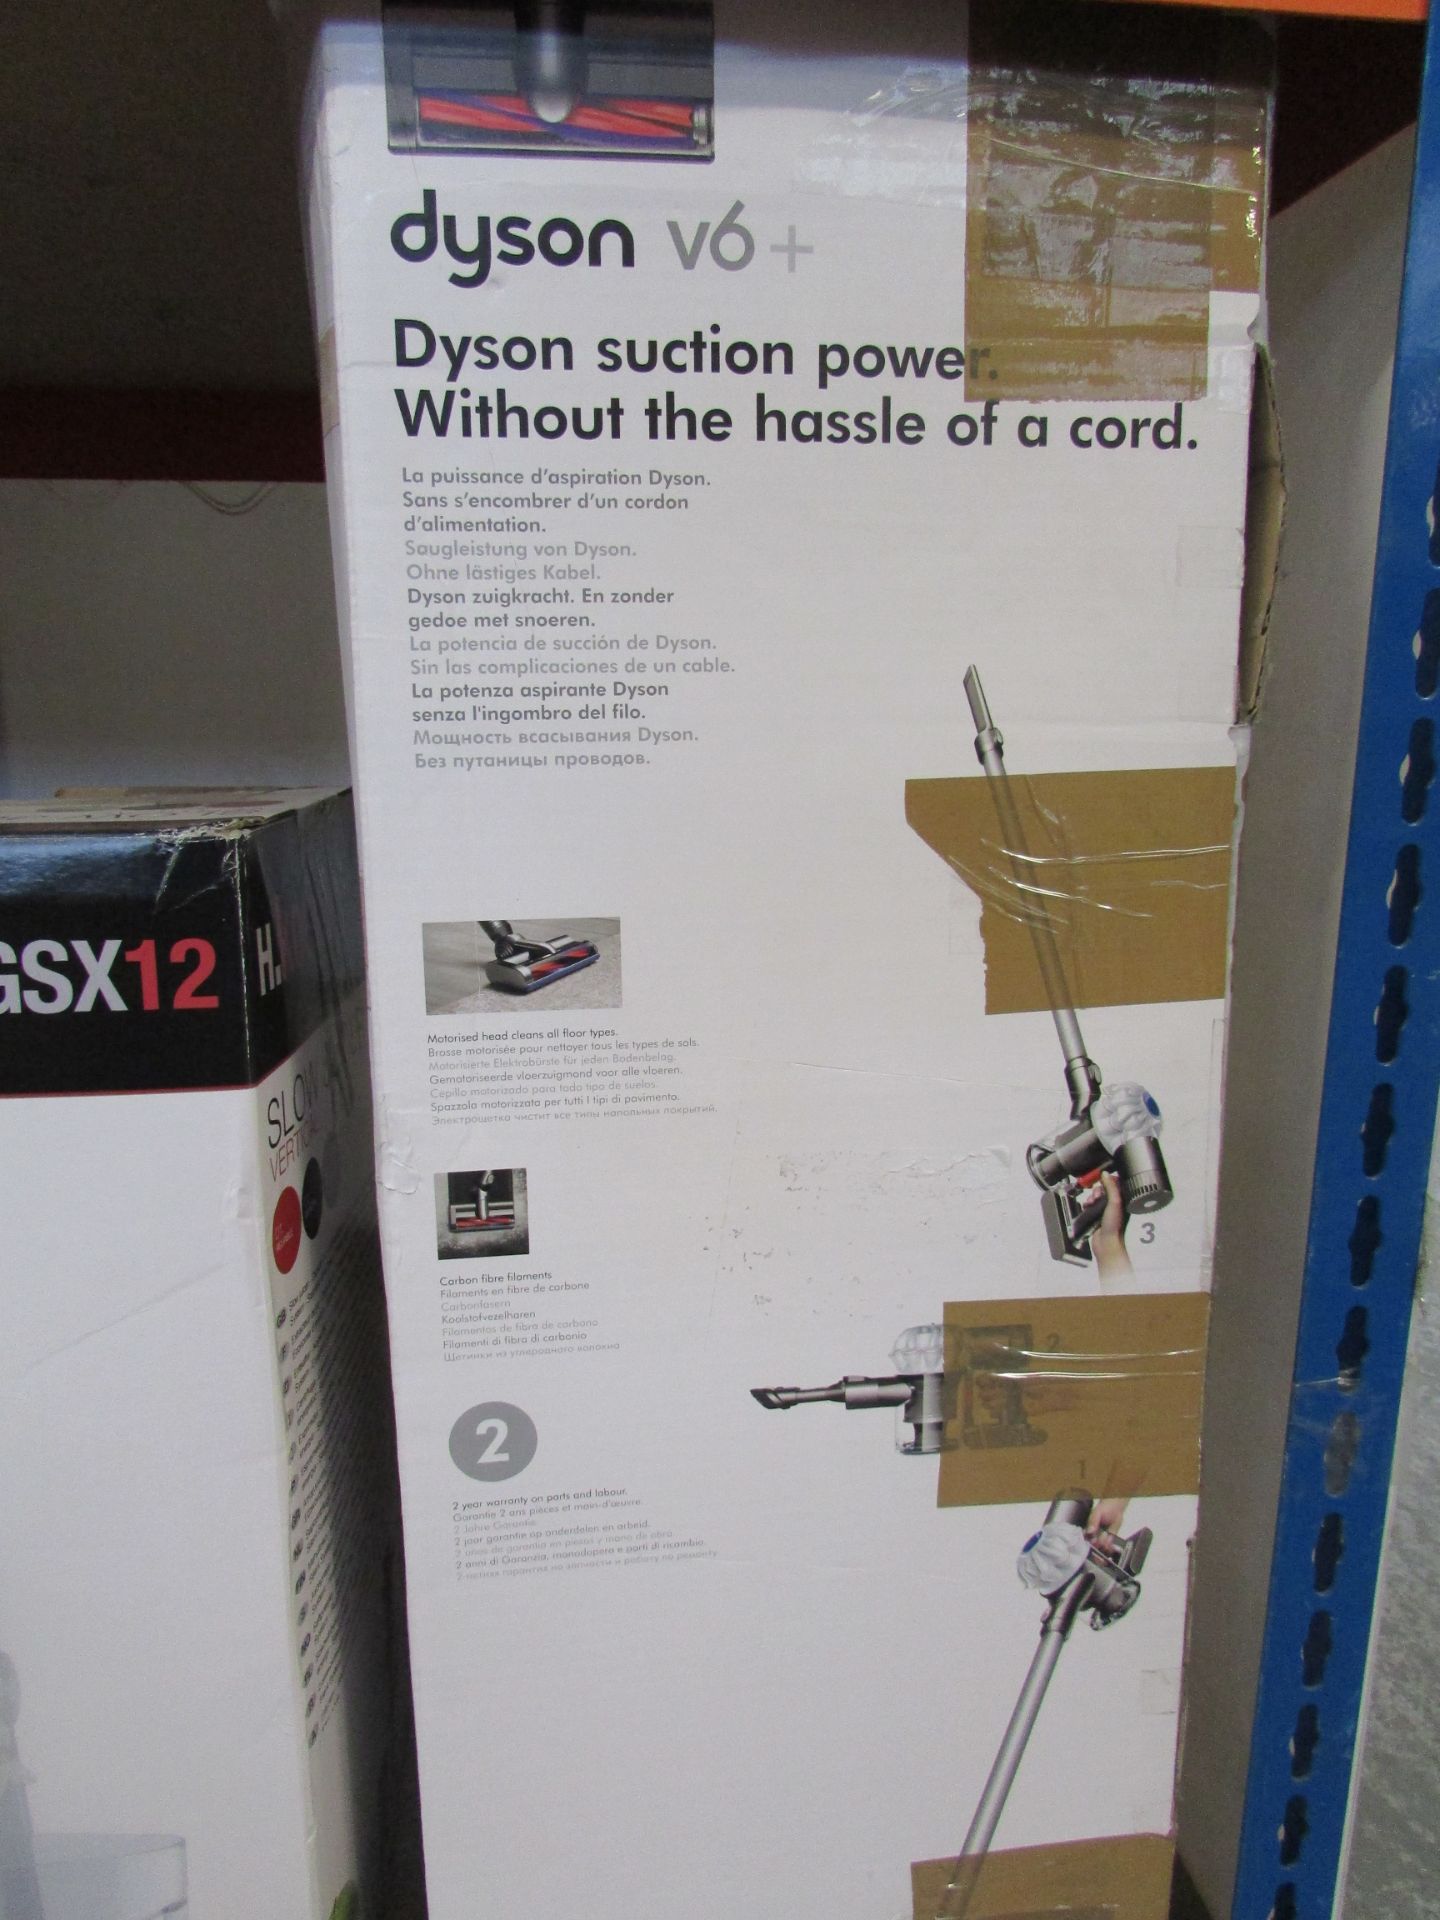 DYSON V6 WITH DYSON SUCTION POWER WITHOUT THE HASSLE OF A CORD